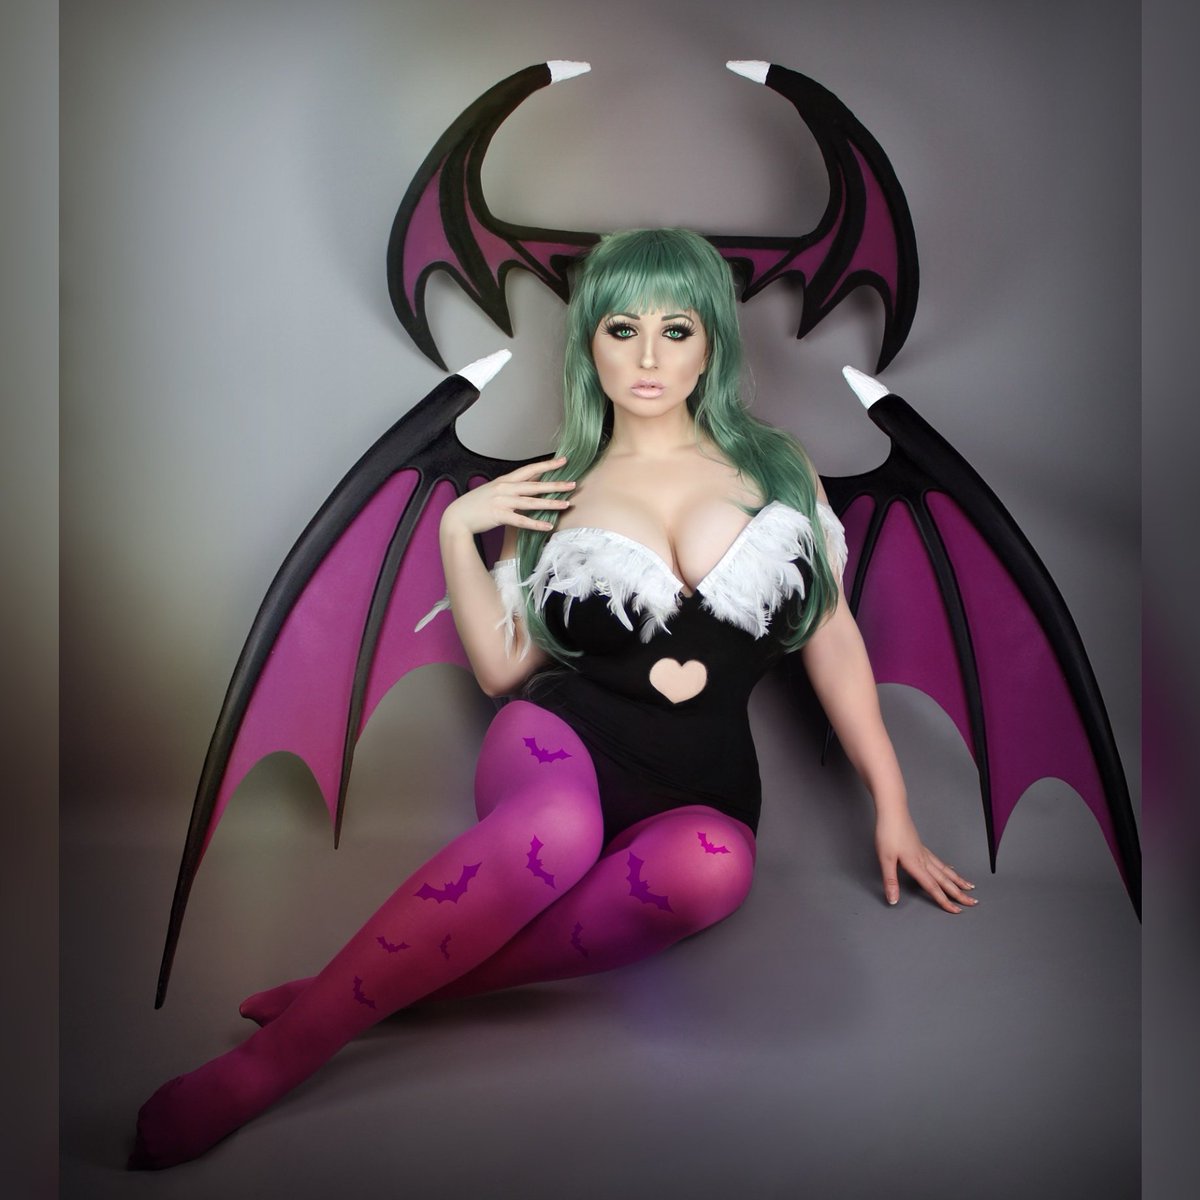 Think I accidentally deleted my Morrigan image here's a repost sending...